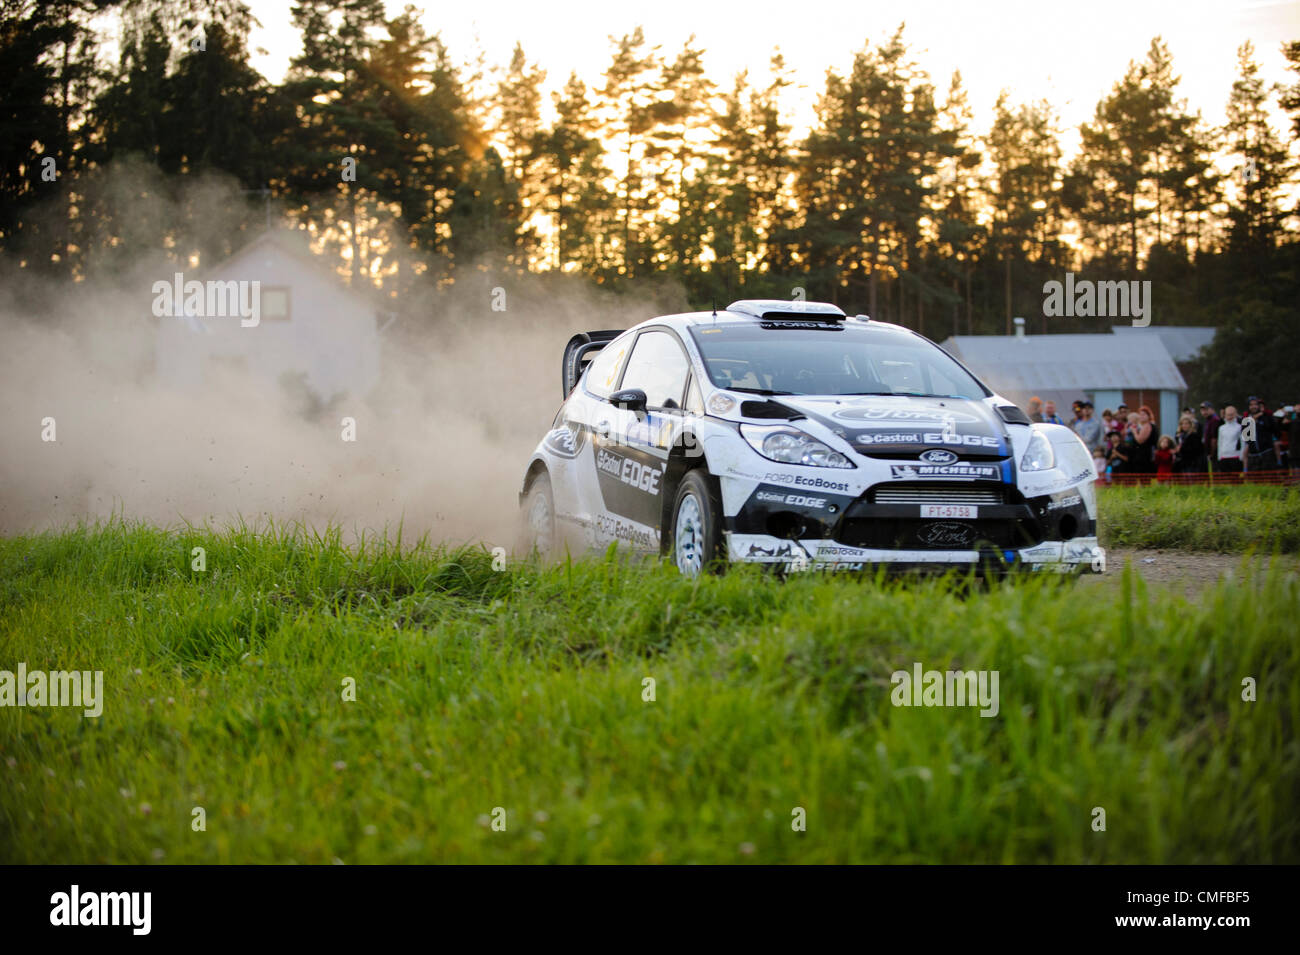 Jari-Matti Latvala of Finland and Miikka Anttila of Finland compete in their Ford World Rally Team Ford Fiesta RS WRC during Day 1 of the WRC Rally Finland on August 2, 2012 in Jyväskylä , Finland. Stock Photo